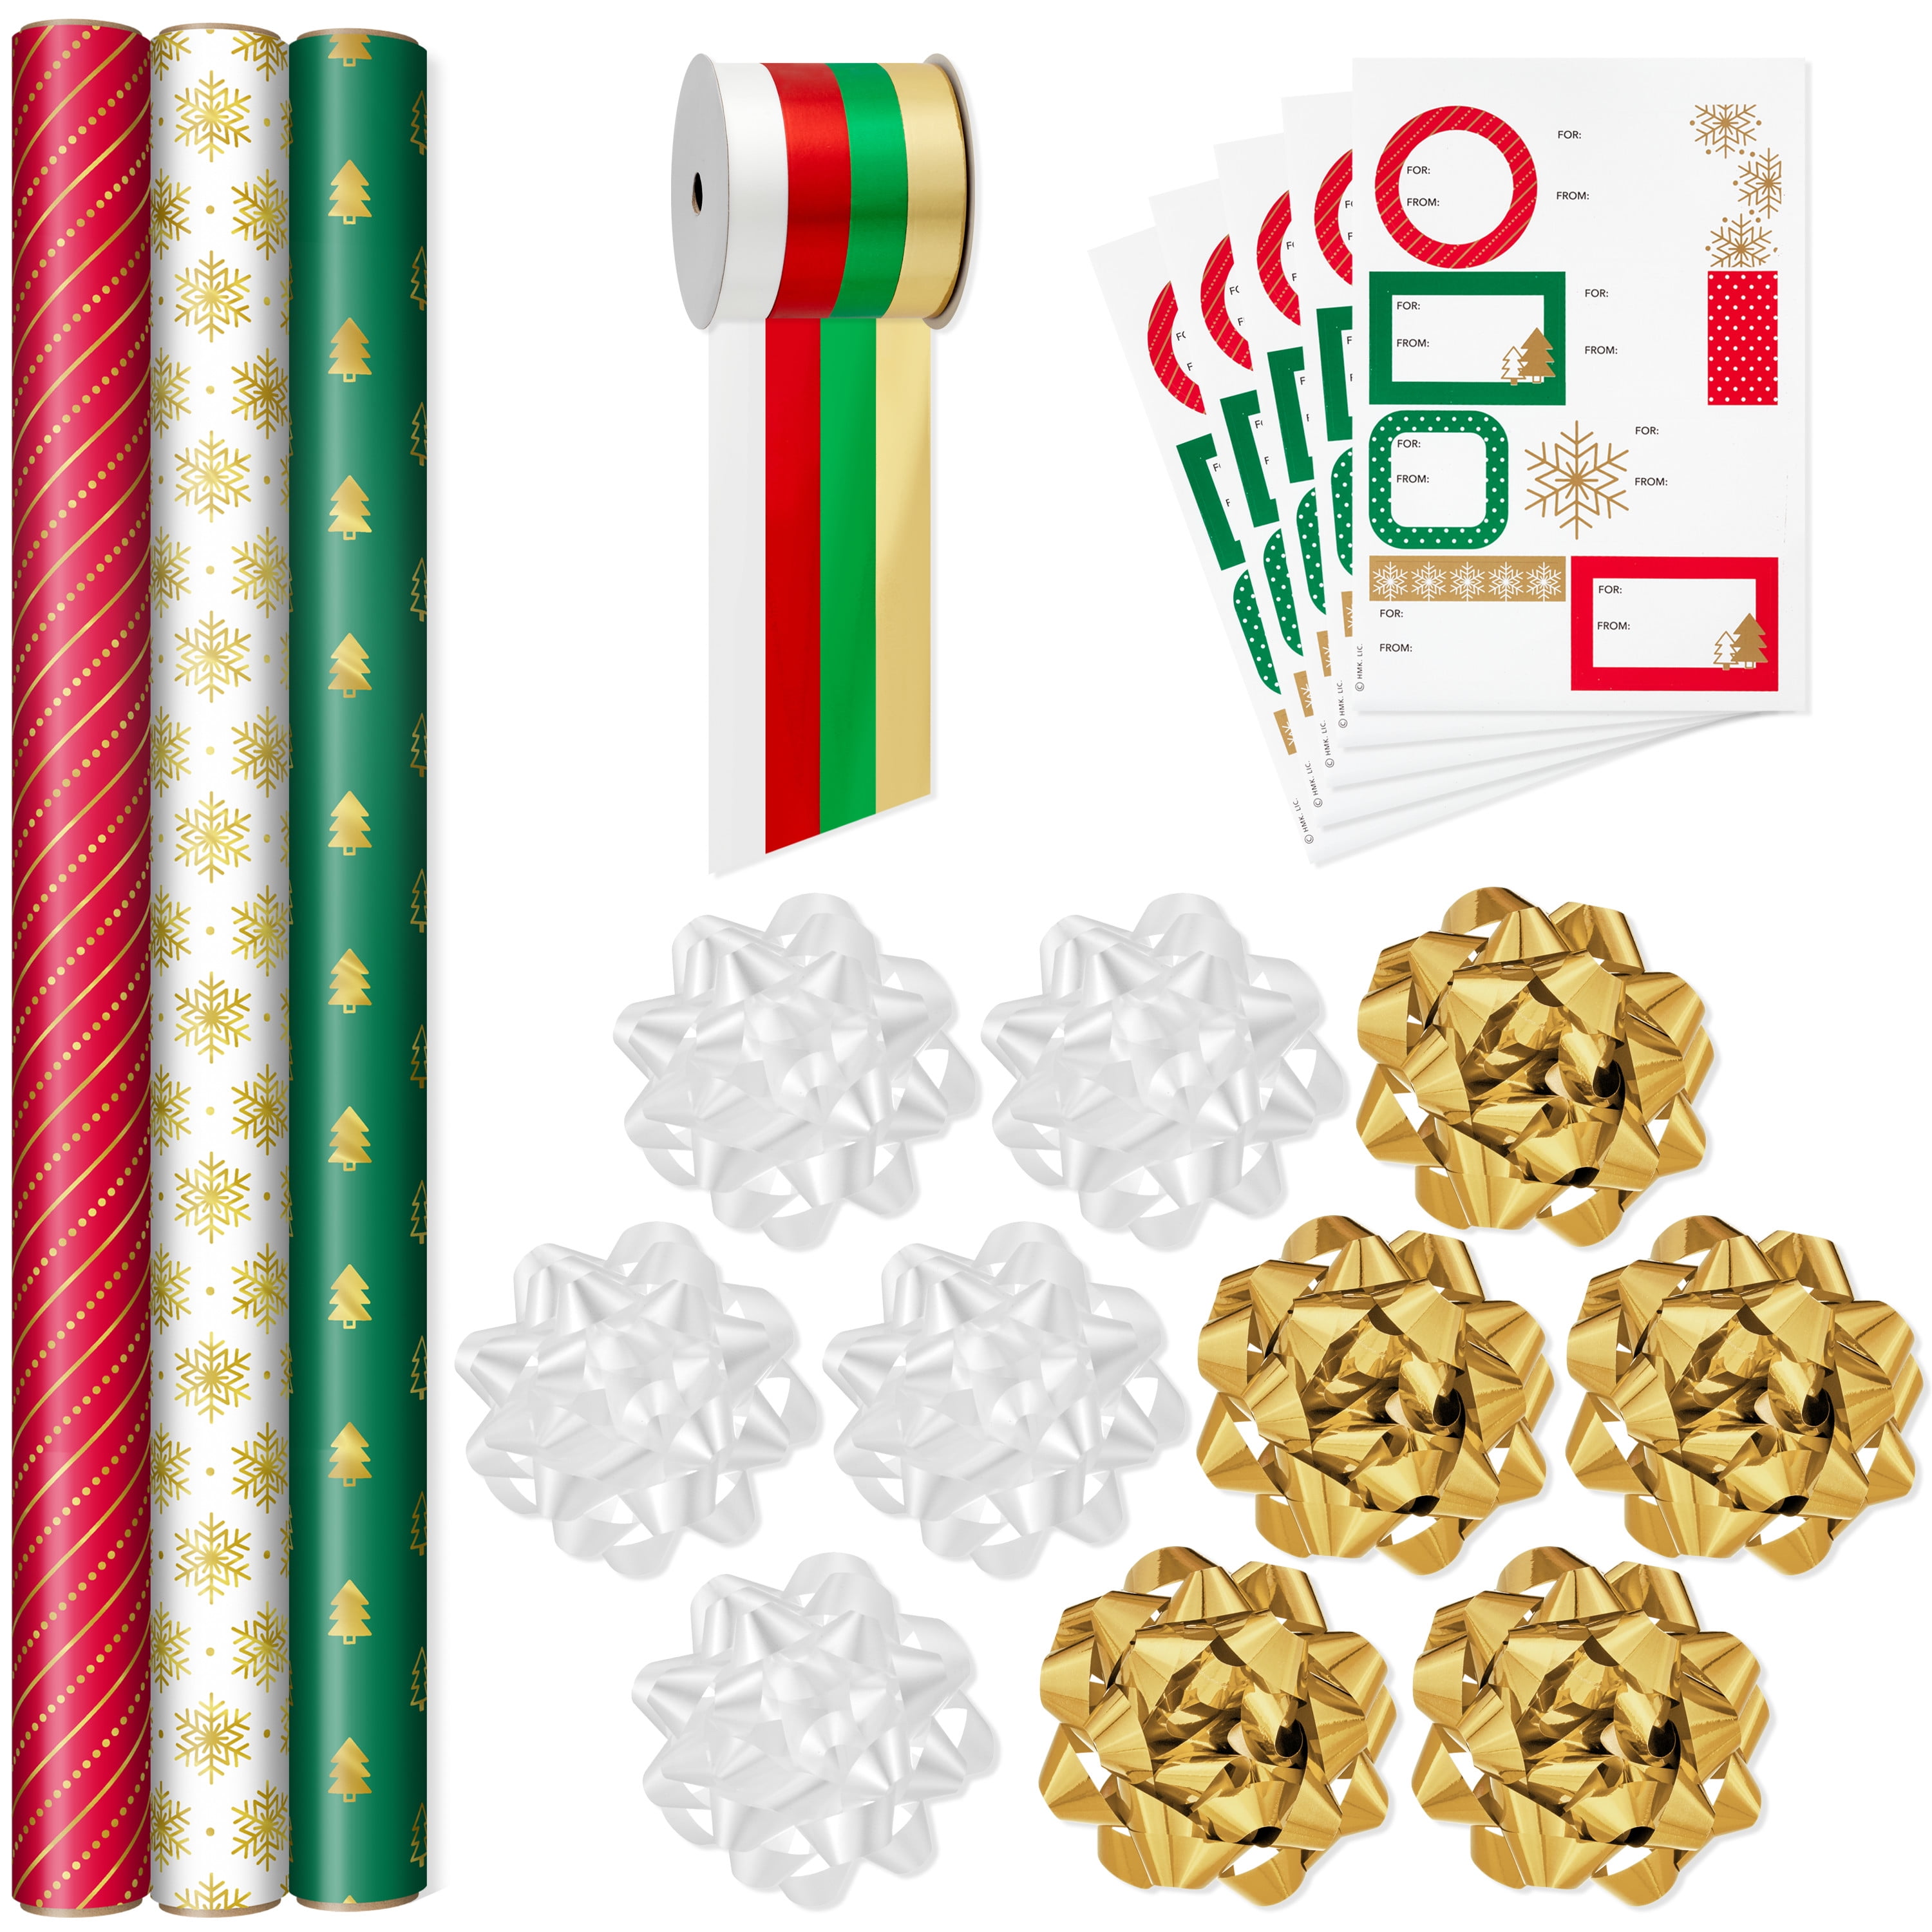 Preppy Christmas Wrapping Paper: Red and Green Ornaments gift Wrap